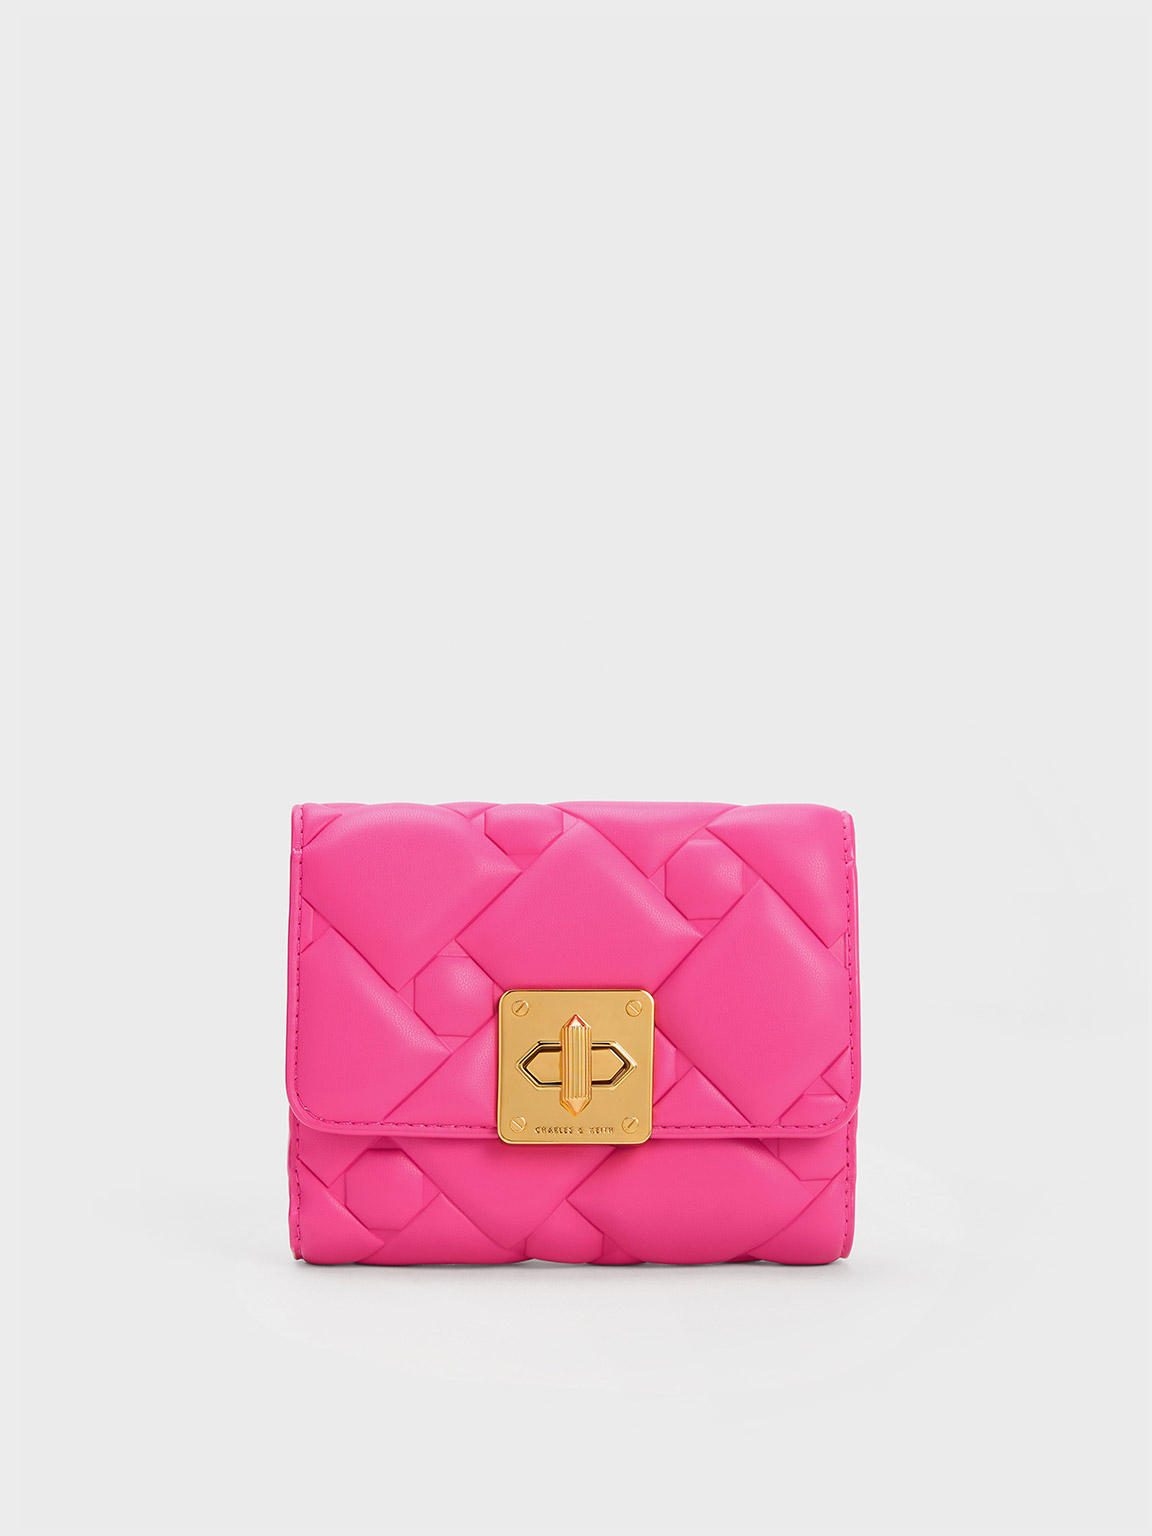 Tillie Quilted Chain Bag - Fuchsia